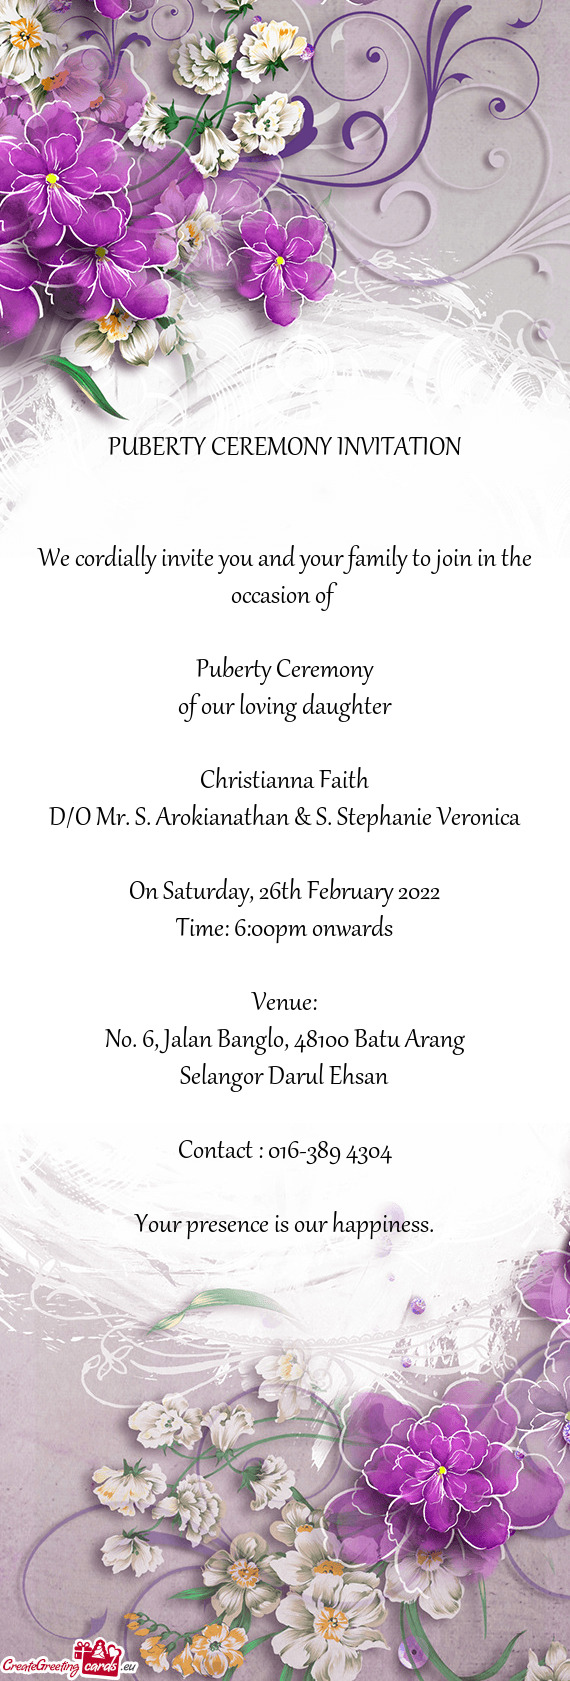 We cordially invite you and your family to join in the occasion of